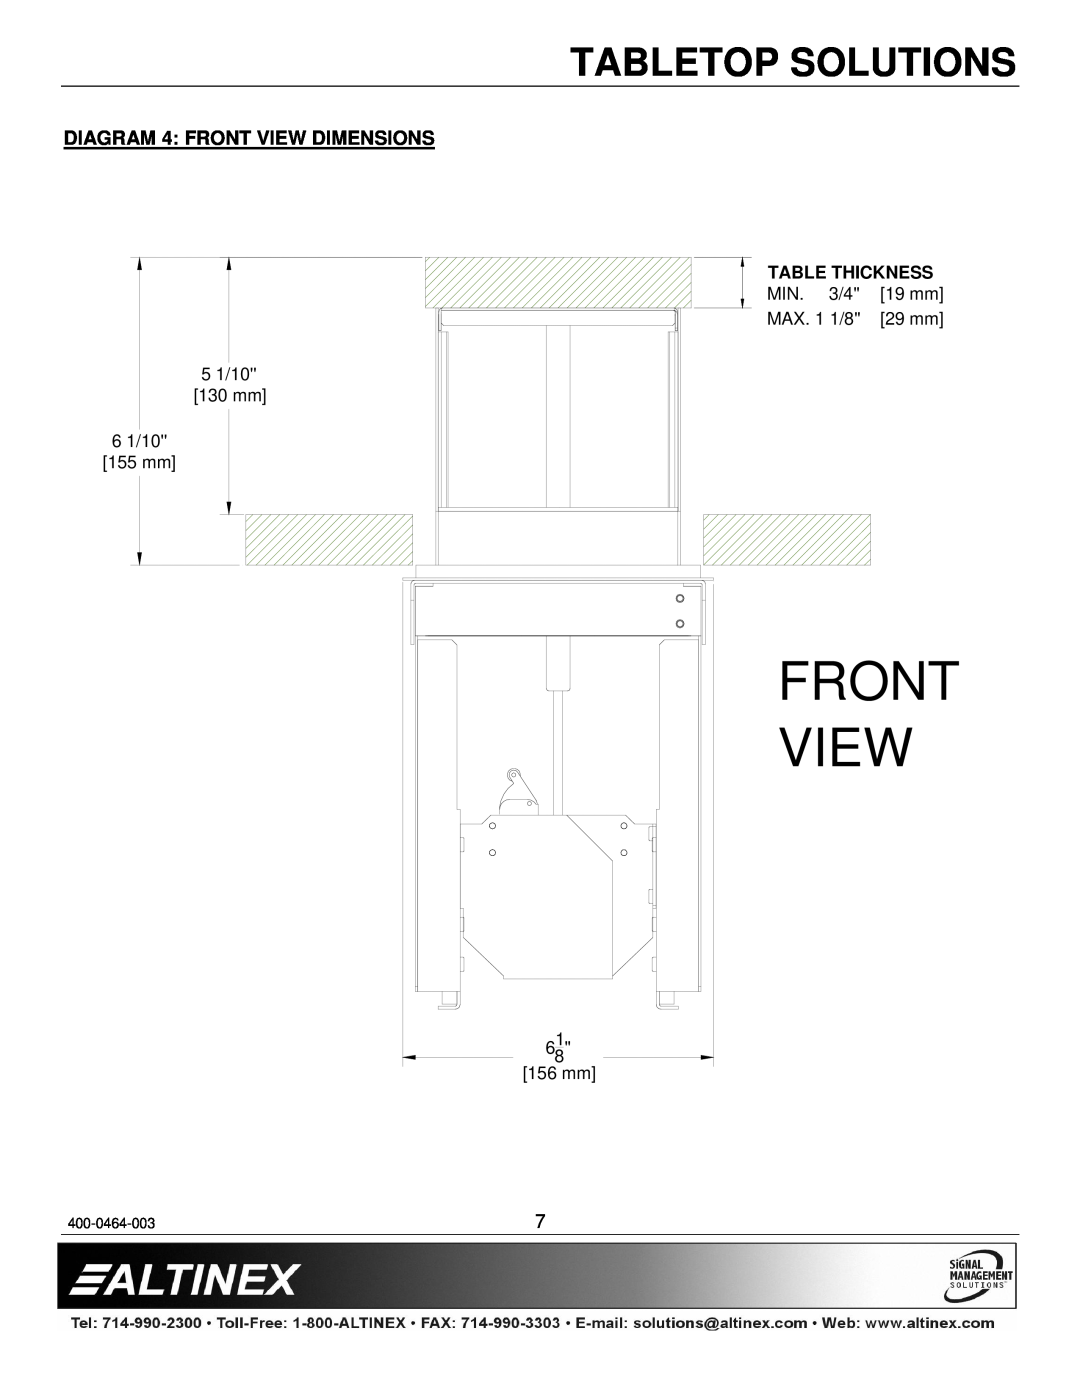 Altinex PNP527C, PNP547 Front View, Tabletop Solutions, DIAGRAM 4 FRONT VIEW DIMENSIONS, Table Thickness, 400-0464-003 